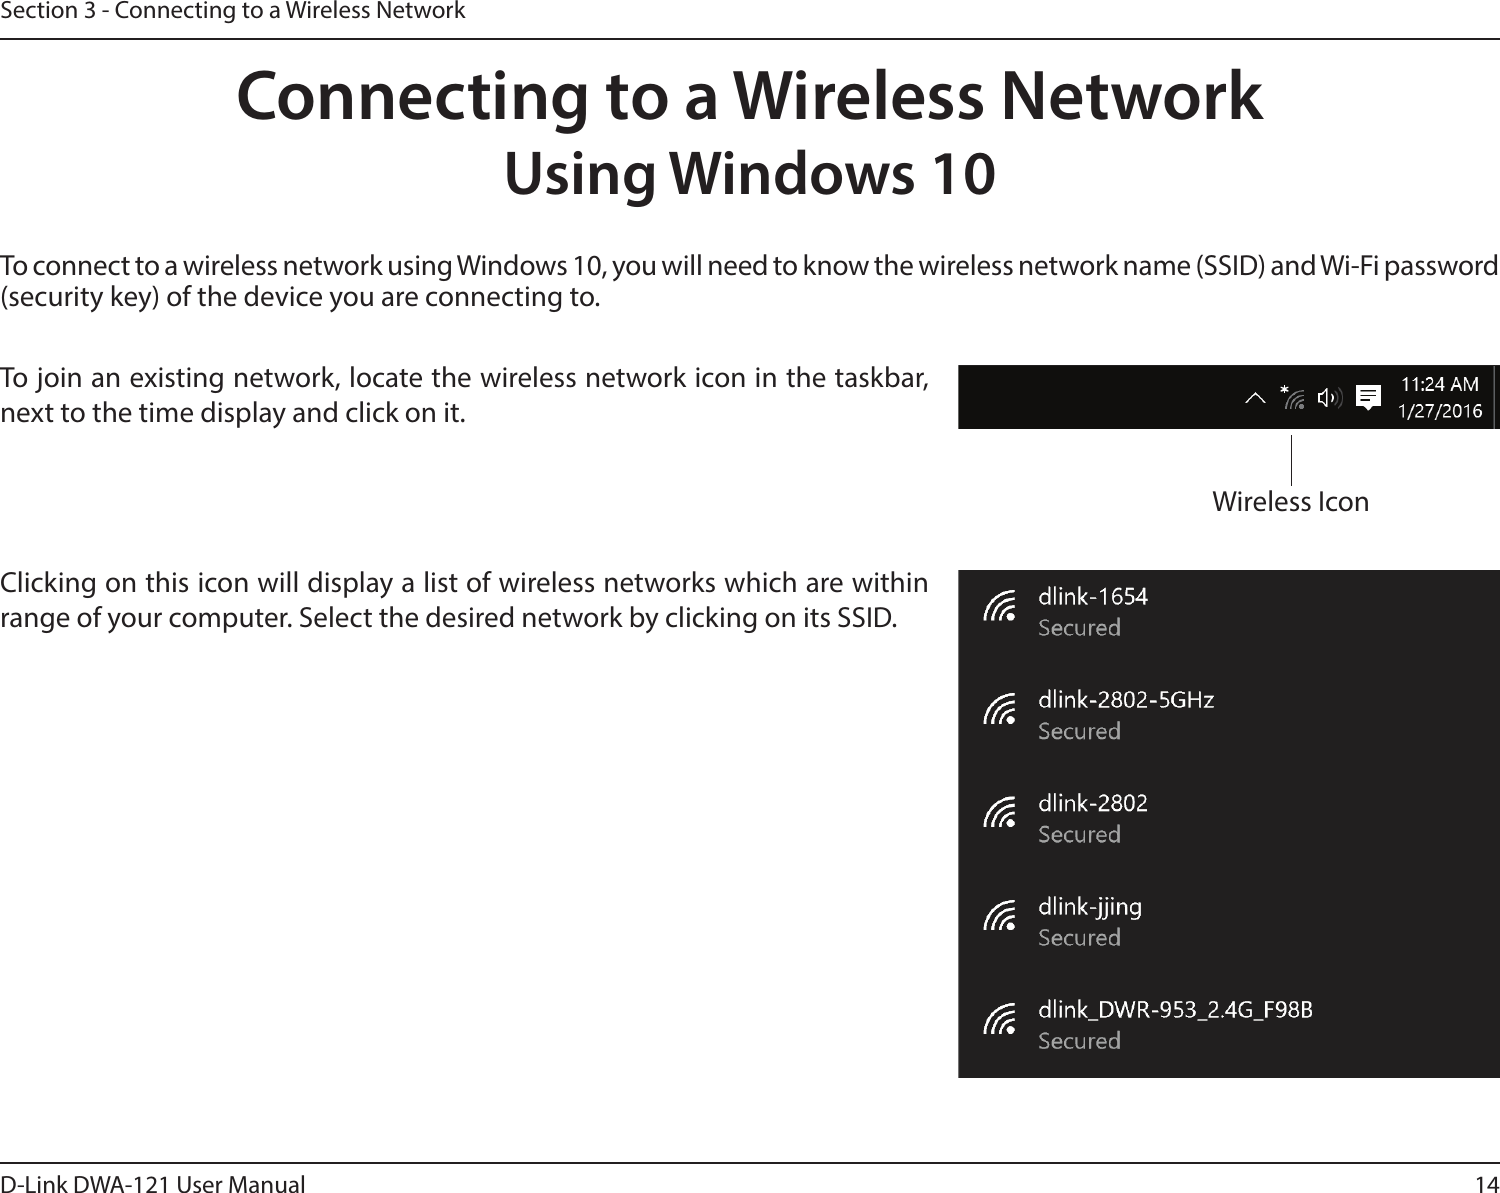 14D-Link DWA-121 User ManualSection 3 - Connecting to a Wireless NetworkTo connect to a wireless network using Windows 10, you will need to know the wireless network name (SSID) and Wi-Fi password (security key) of the device you are connecting to. To join an existing network, locate the wireless network icon in the taskbar, next to the time display and click on it. Wireless IconClicking on this icon will display a list of wireless networks which are within range of your computer. Select the desired network by clicking on its SSID.Connecting to a Wireless NetworkUsing Windows 10